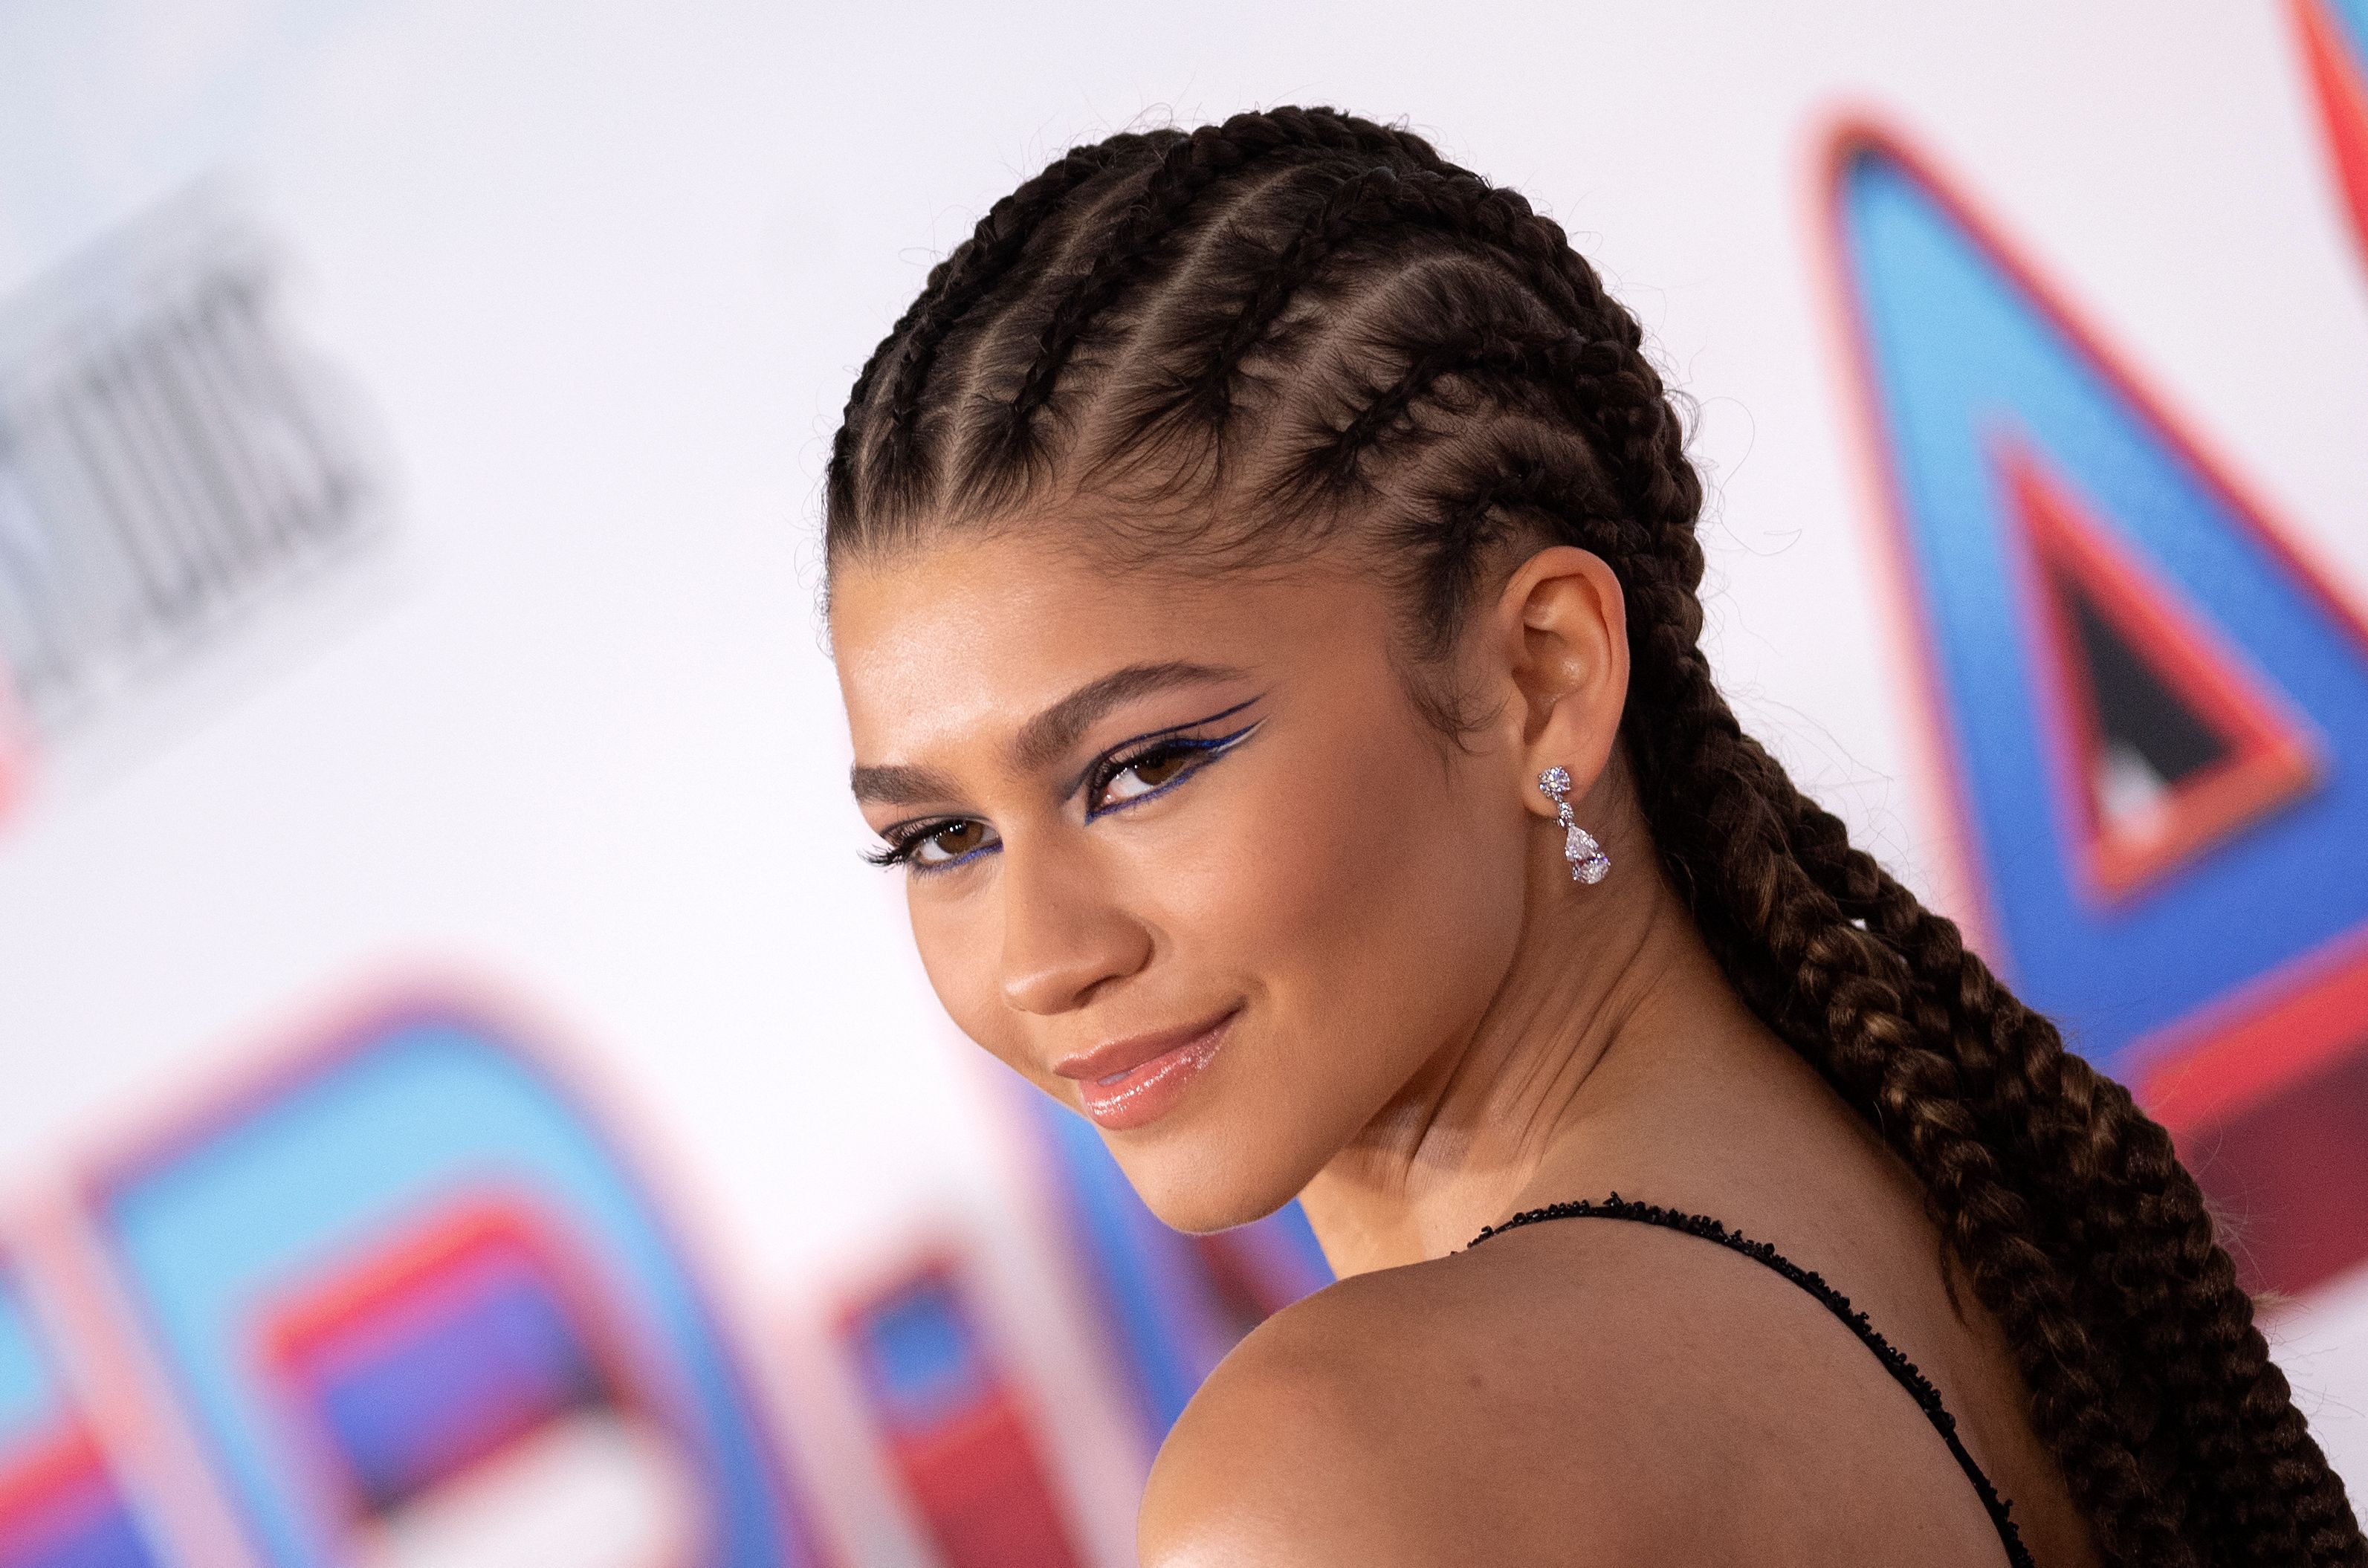 Zendaya attends the "Spider-Man: No way home" premiere at the Regency Village and Bruin Theatres, in Los Angeles, California, on December 13, 2021.  | Source: Getty Images